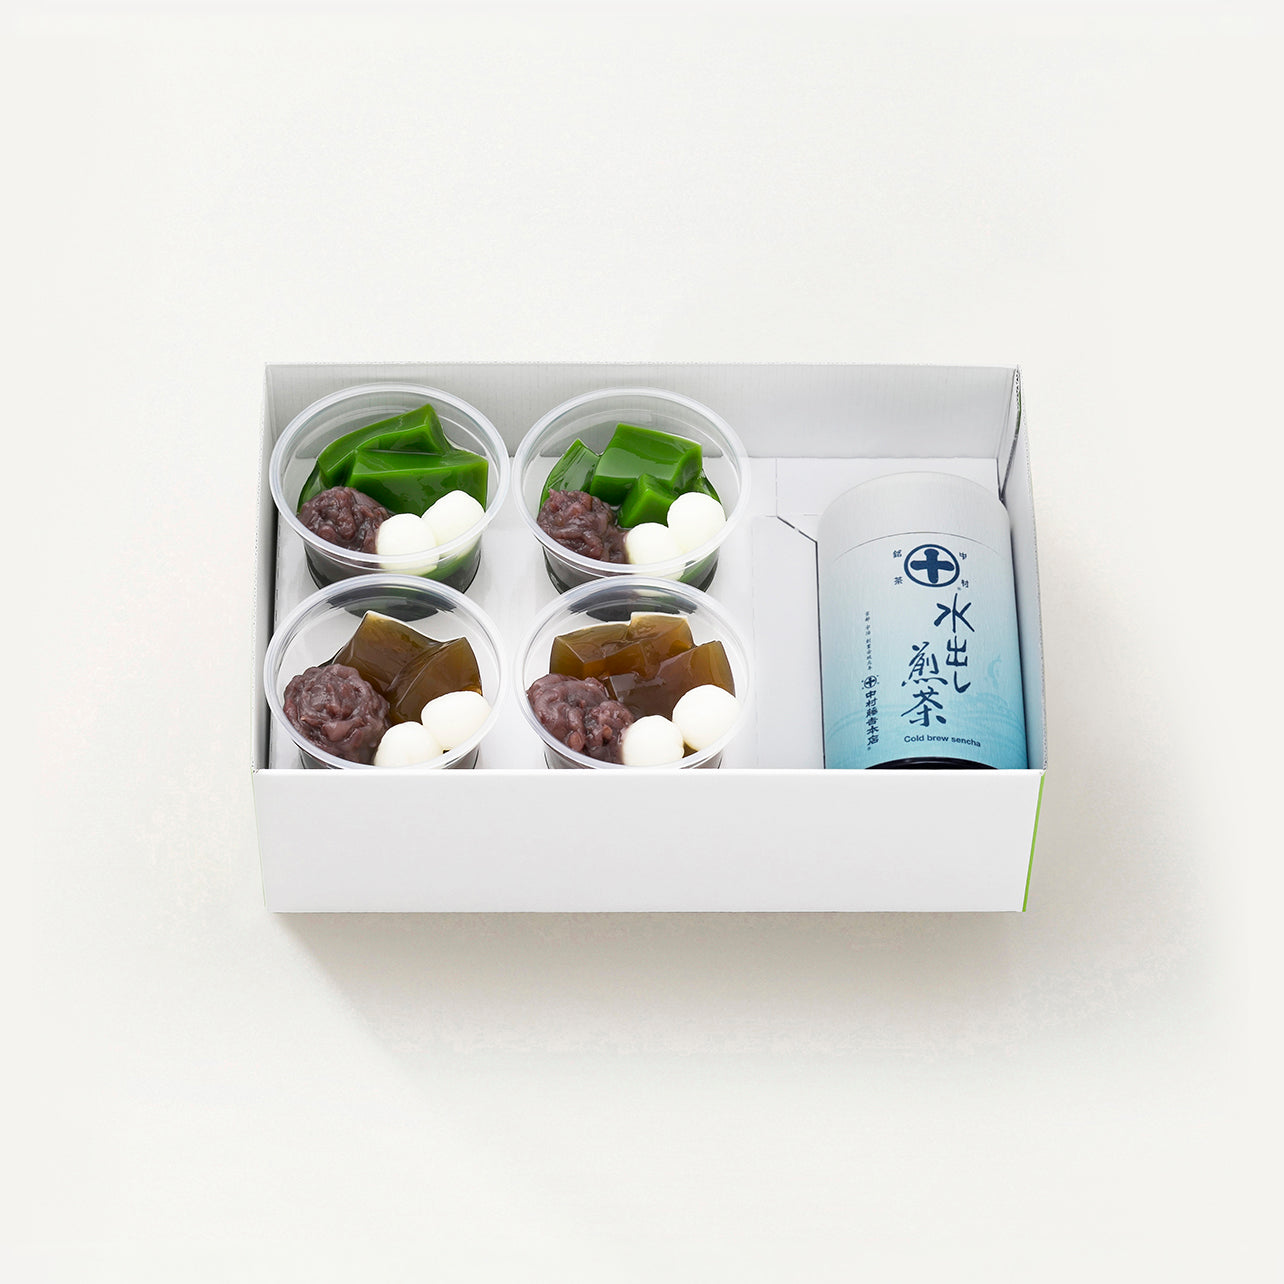 Assortment of 2 types of Namacha Jelly and Cold Brewed Sencha